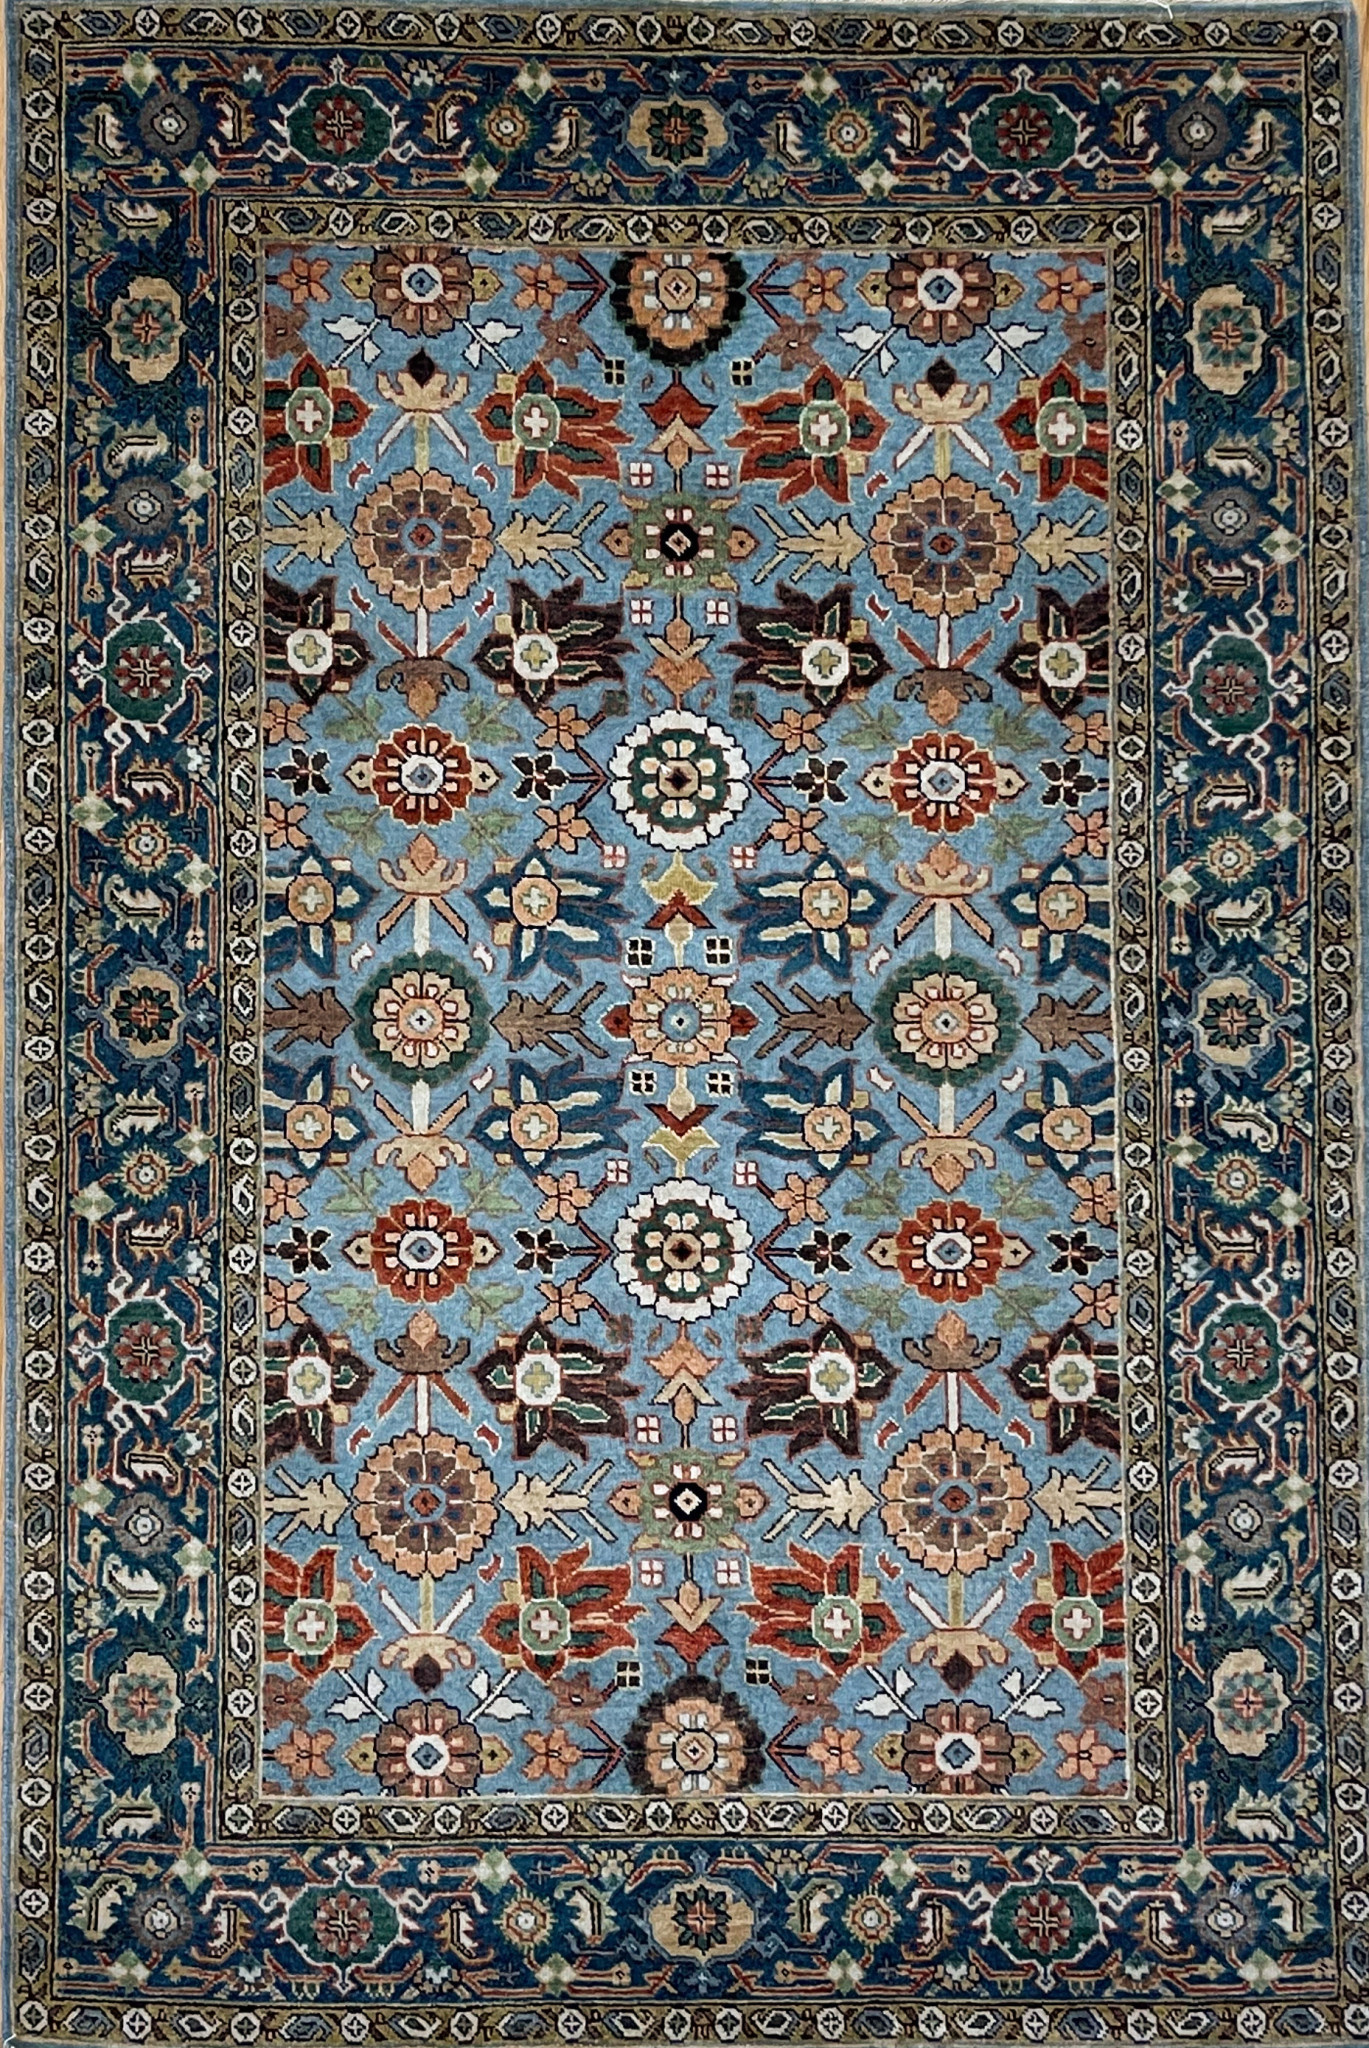 15274-Sarough Hand-Knotted/Handmade Persian Rug/Carpet Traditional